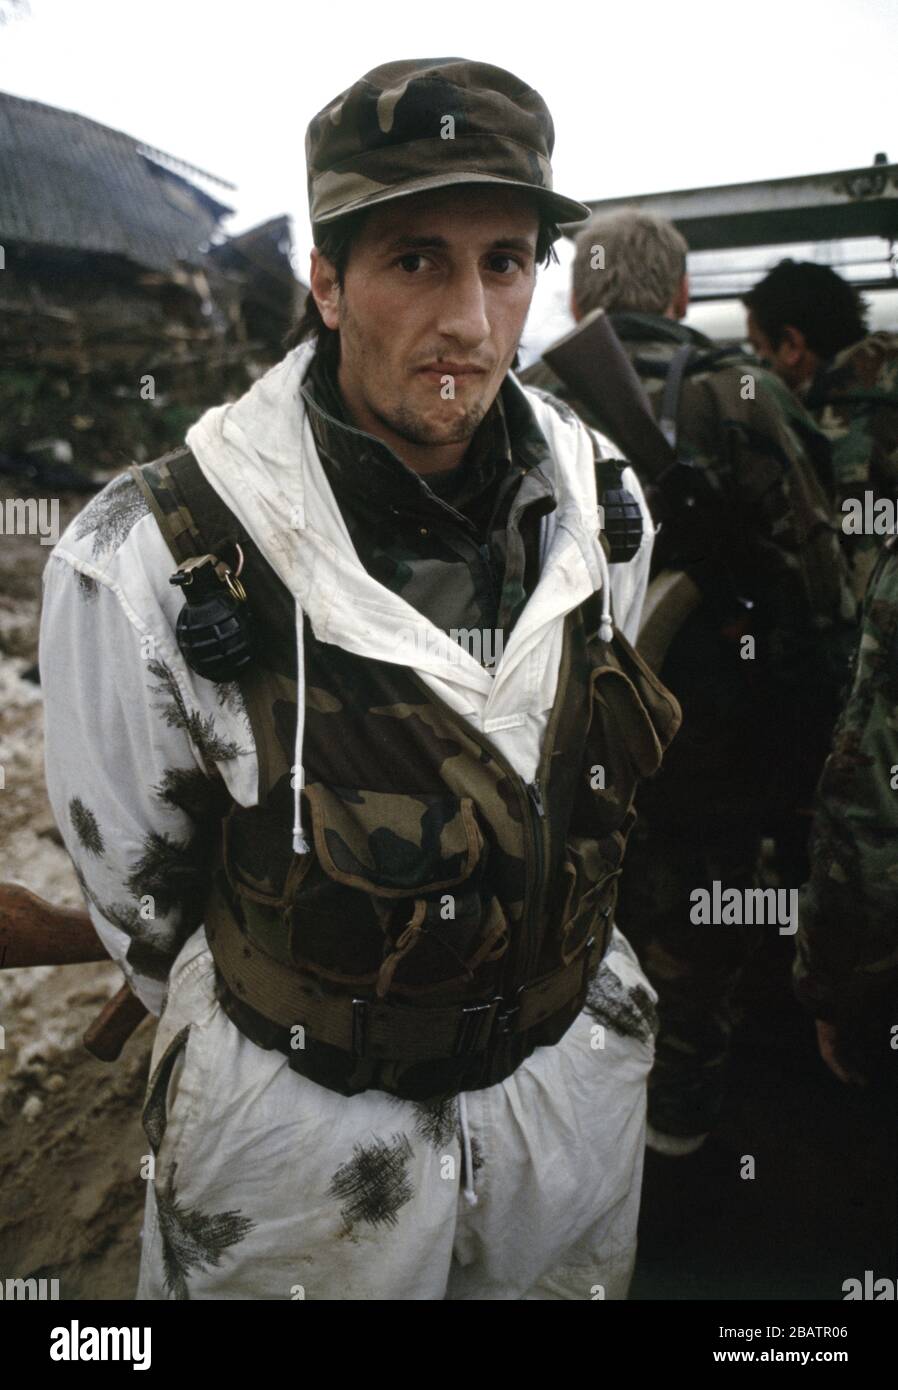 26th January 1994 During the war in central Bosnia: a soldier of the HVO's Rama Brigade wearing a snow camouflage oversuit in the Bosnian Muslim village of Here, which was captured two days earlier. Stock Photo